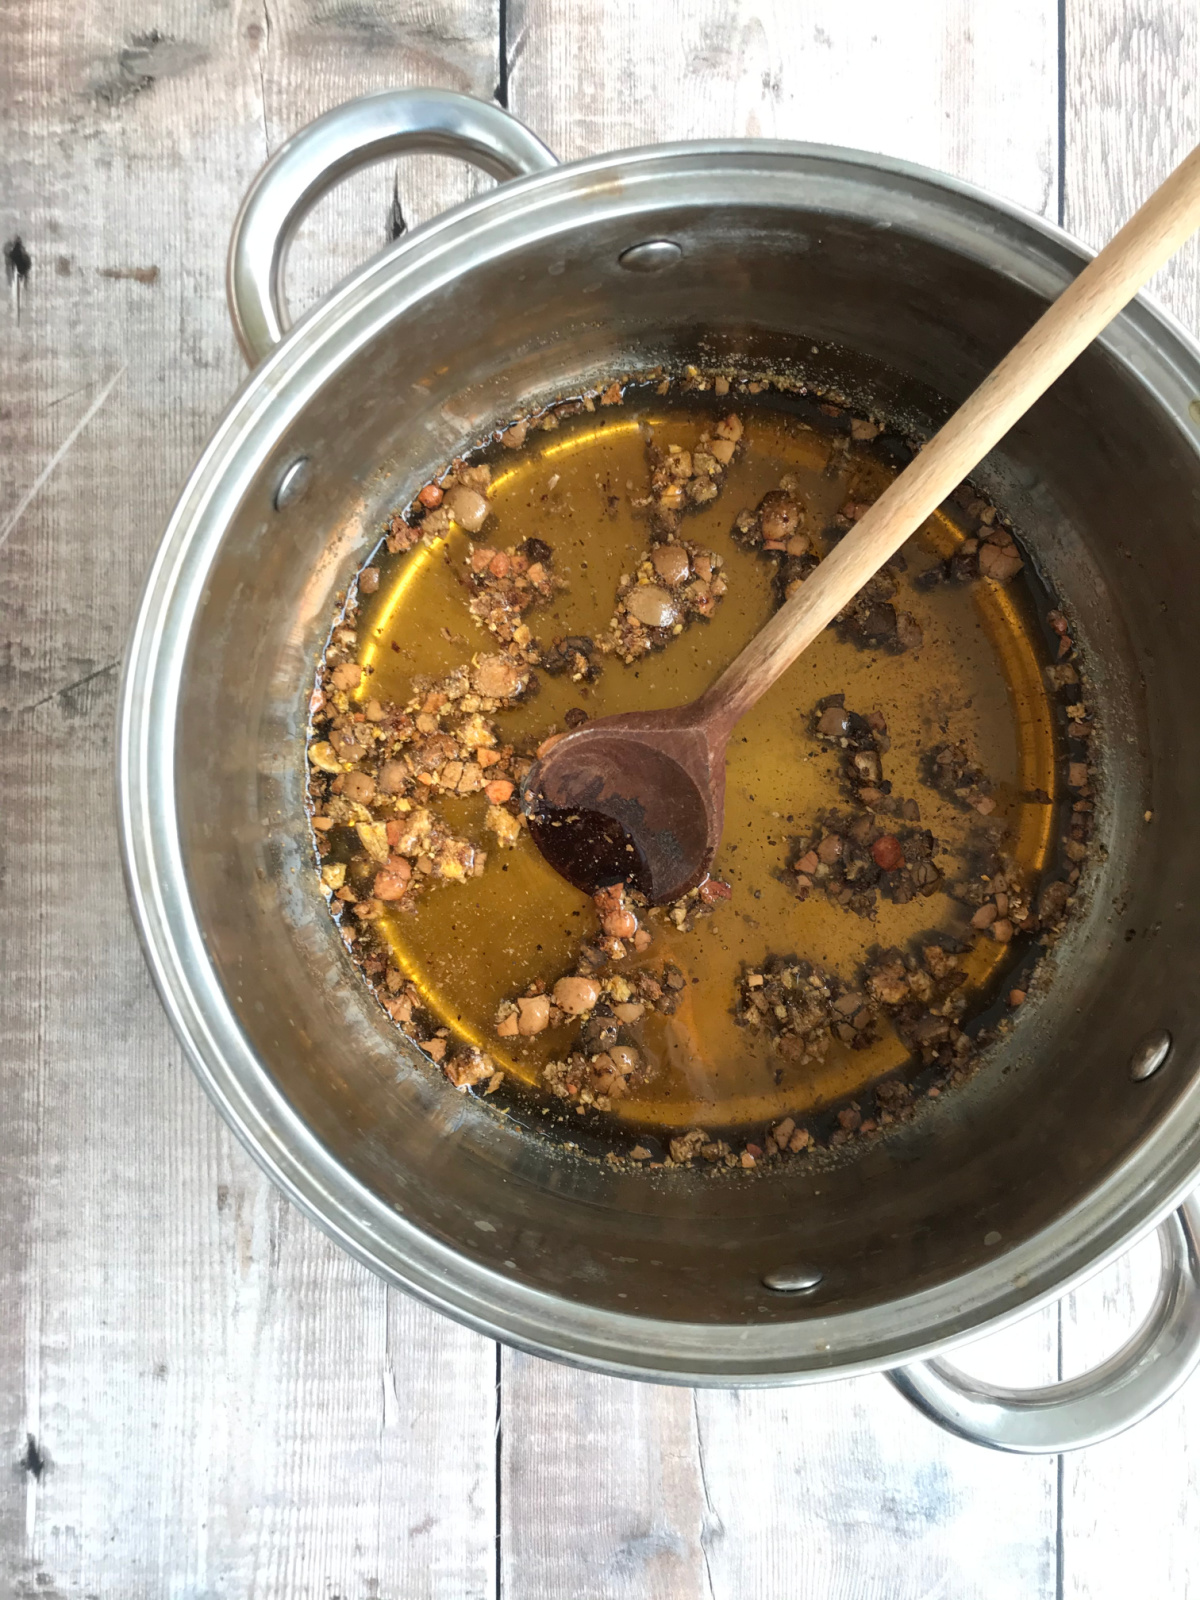 steeping coreopsis flowers to make paint